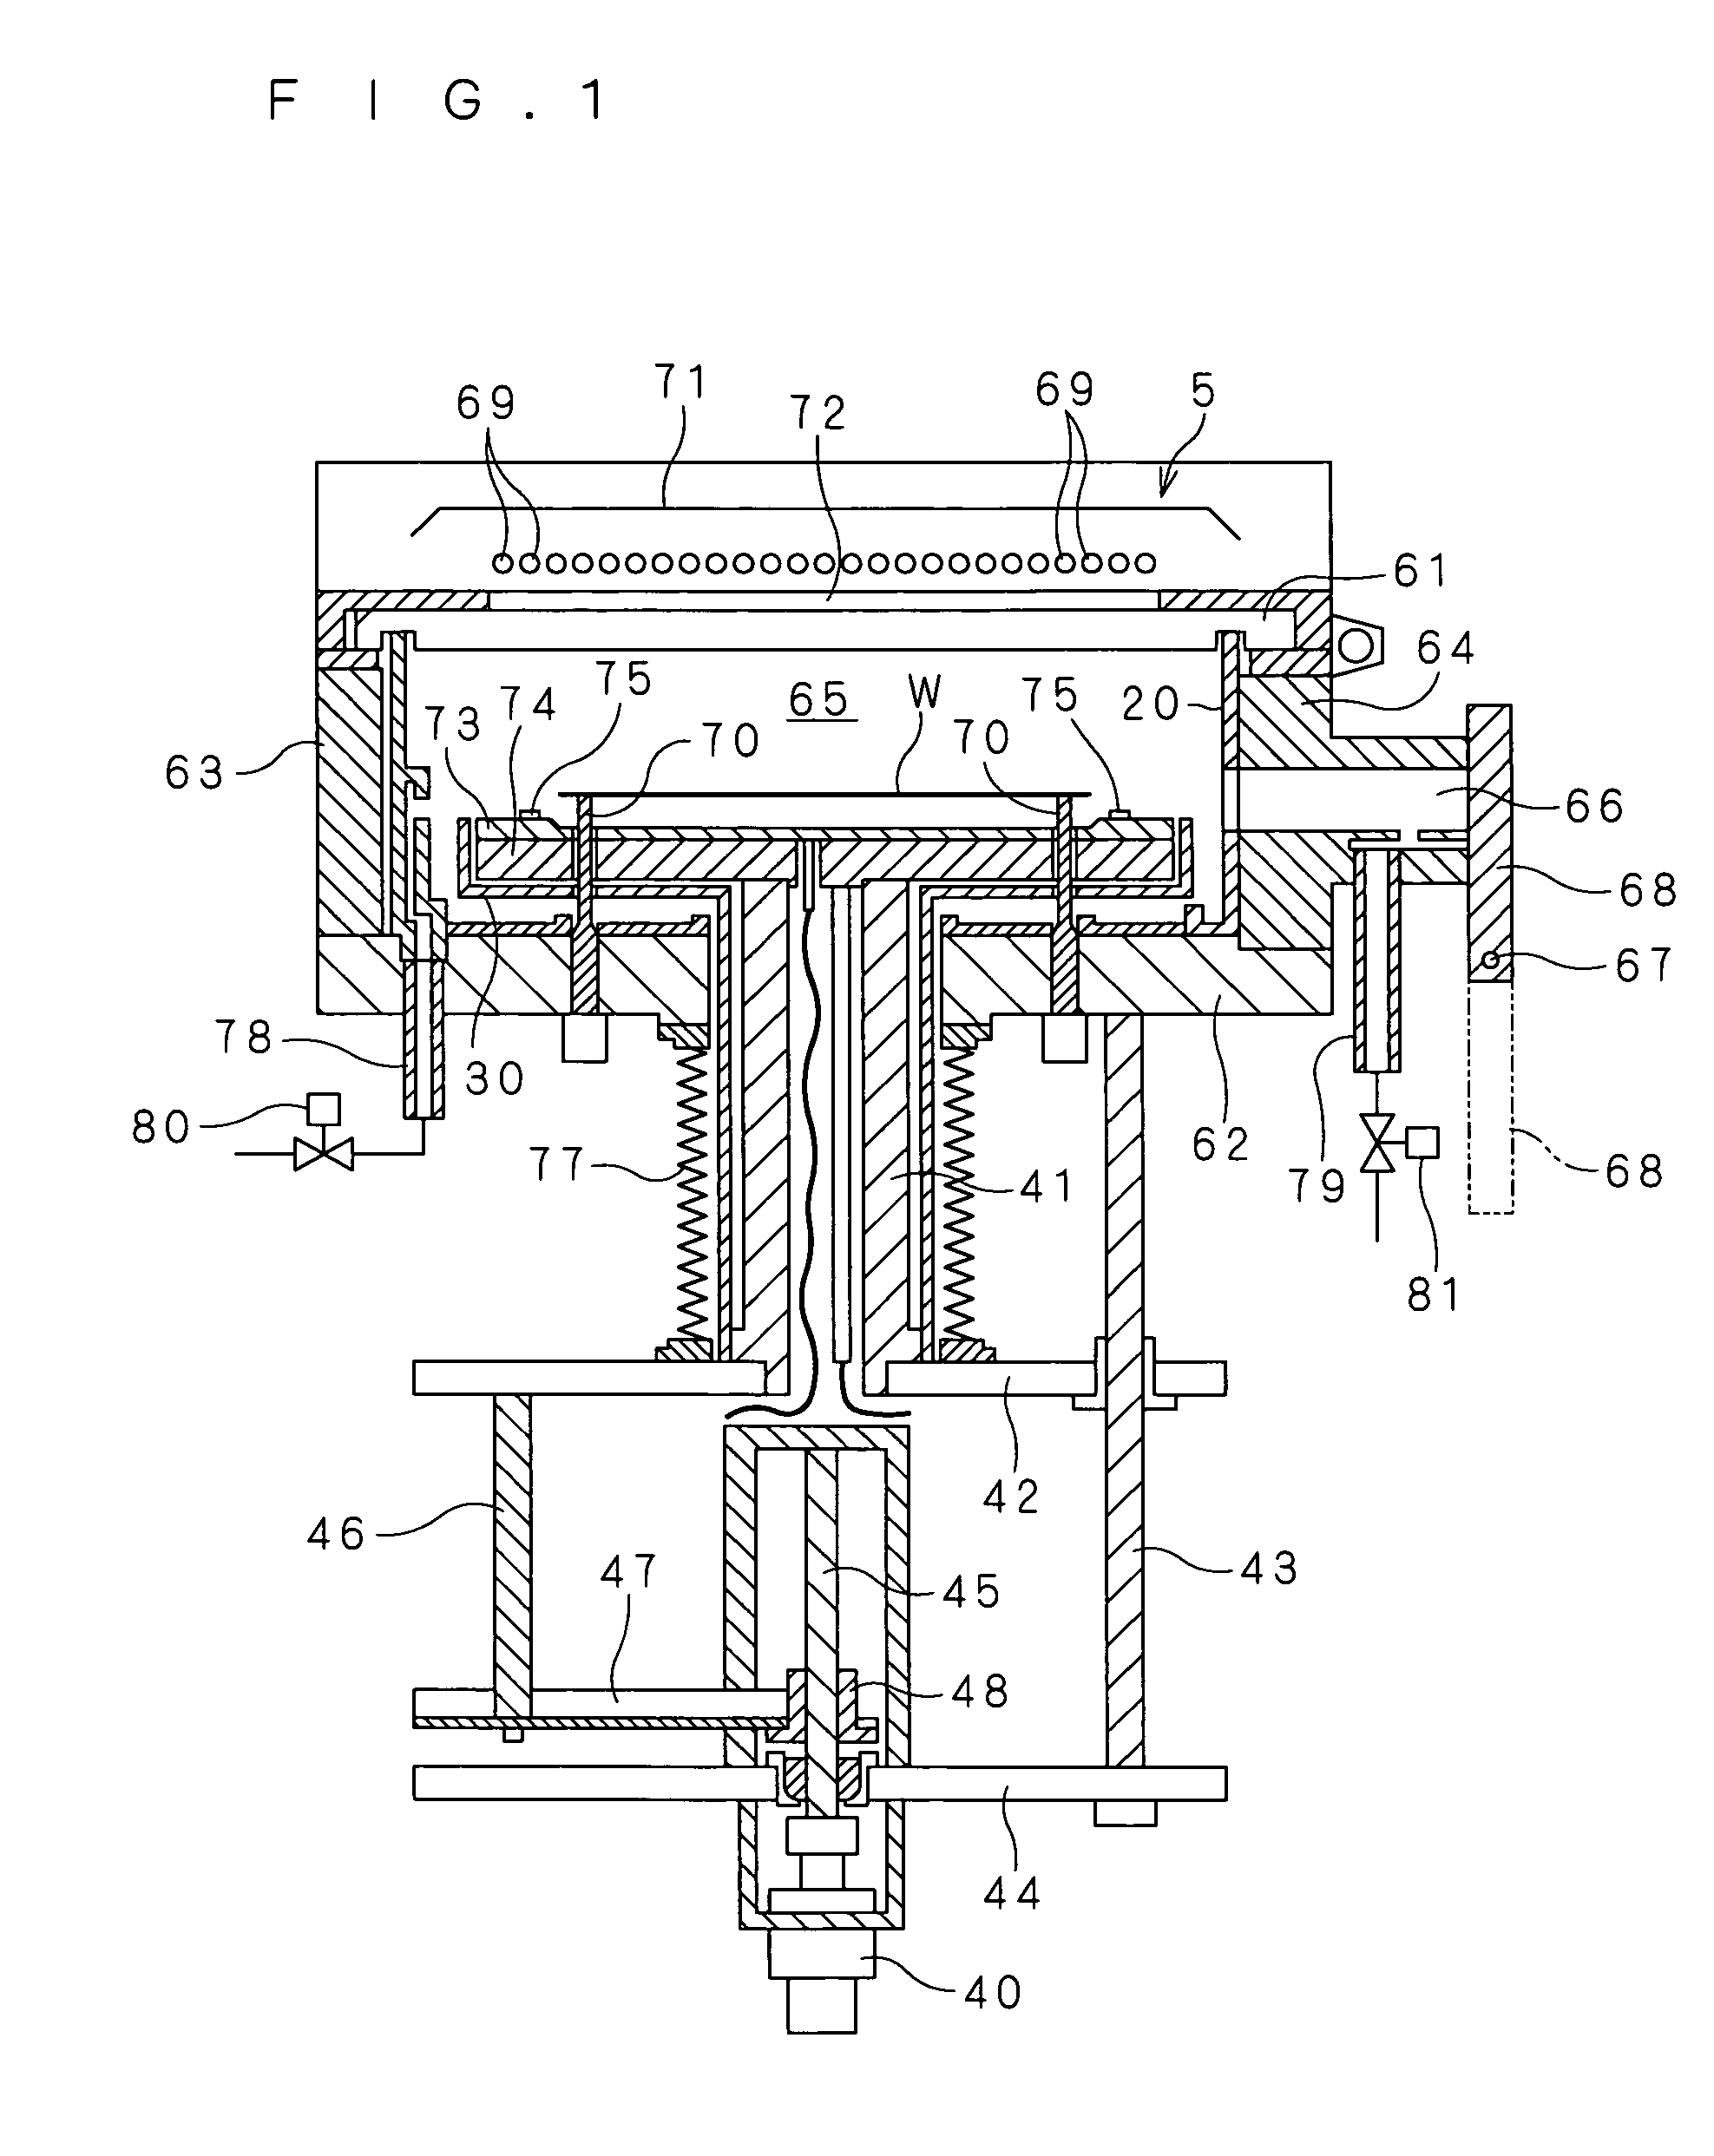 Heat treatment apparatus by means of light irradiation